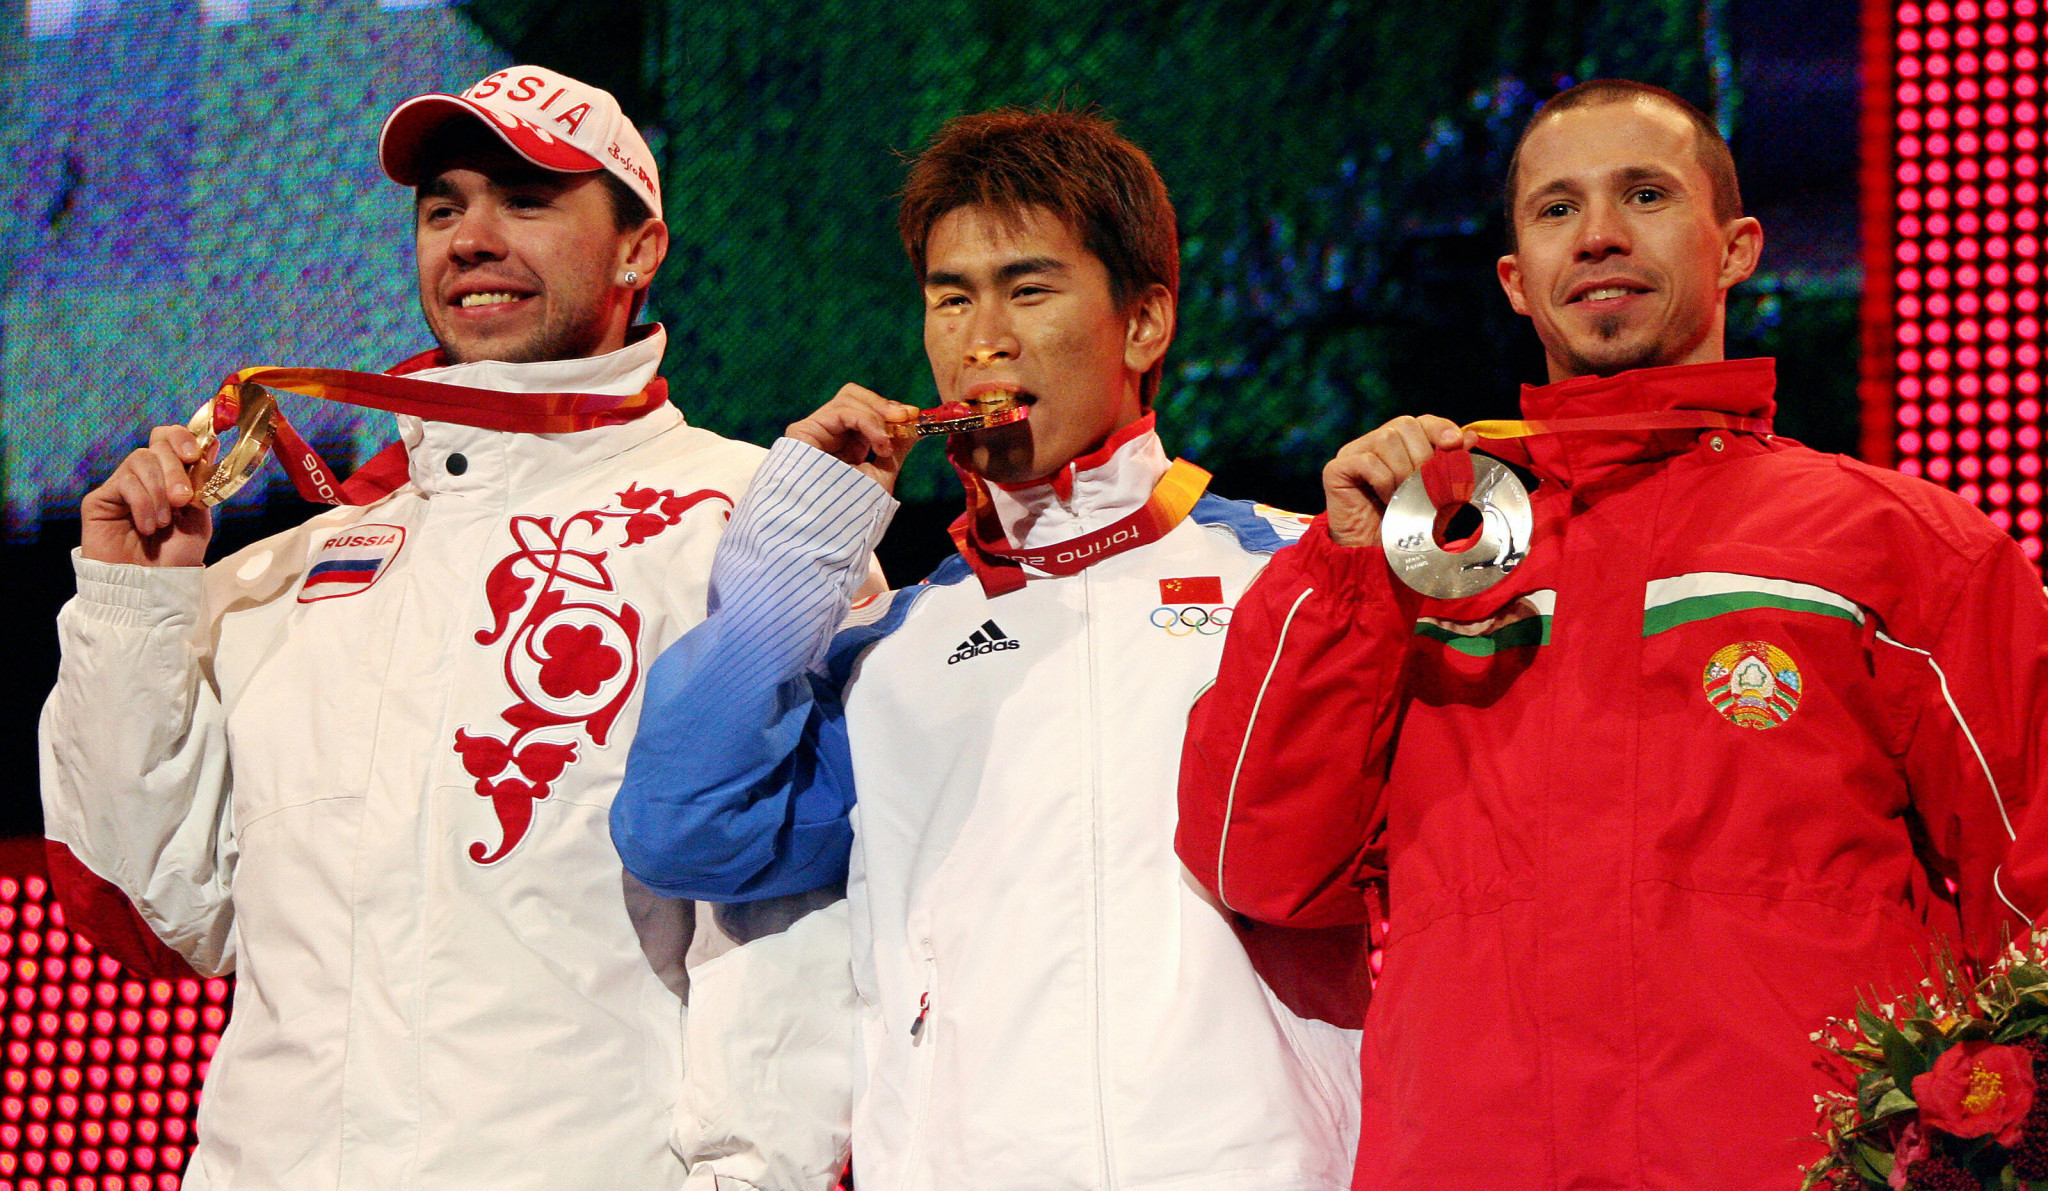 Vladimir Lebedev, left, represented Russia between 2000 and 2010, winning bronze at Turin 2006 in the men's aerials ©Getty Images